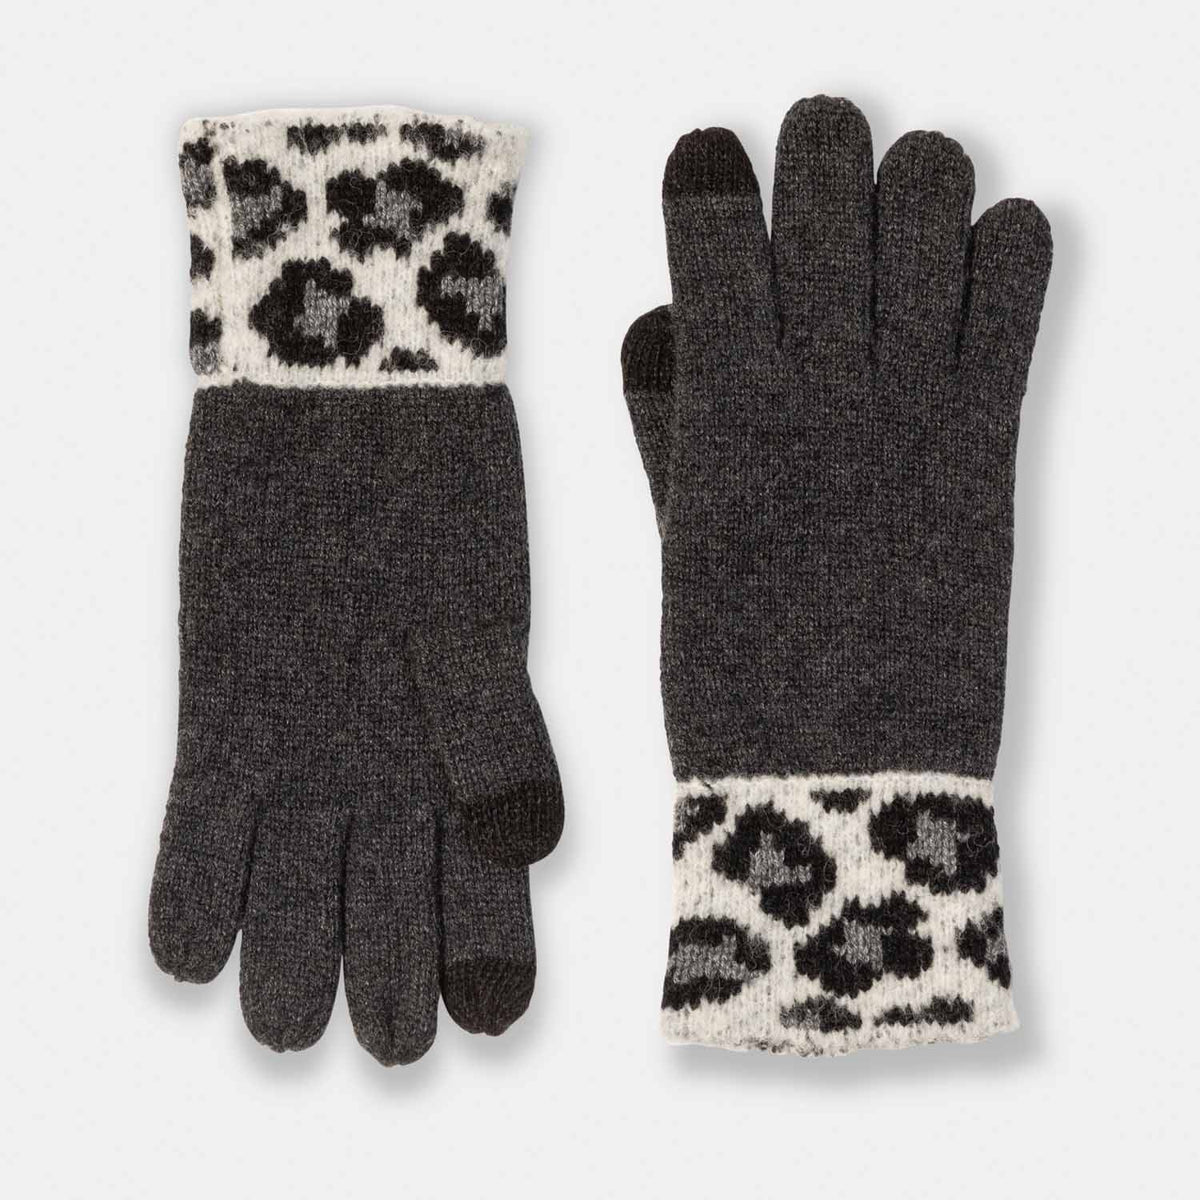 Picture of knit cashmere glove with cheetah print cuff detail, grey and cream.